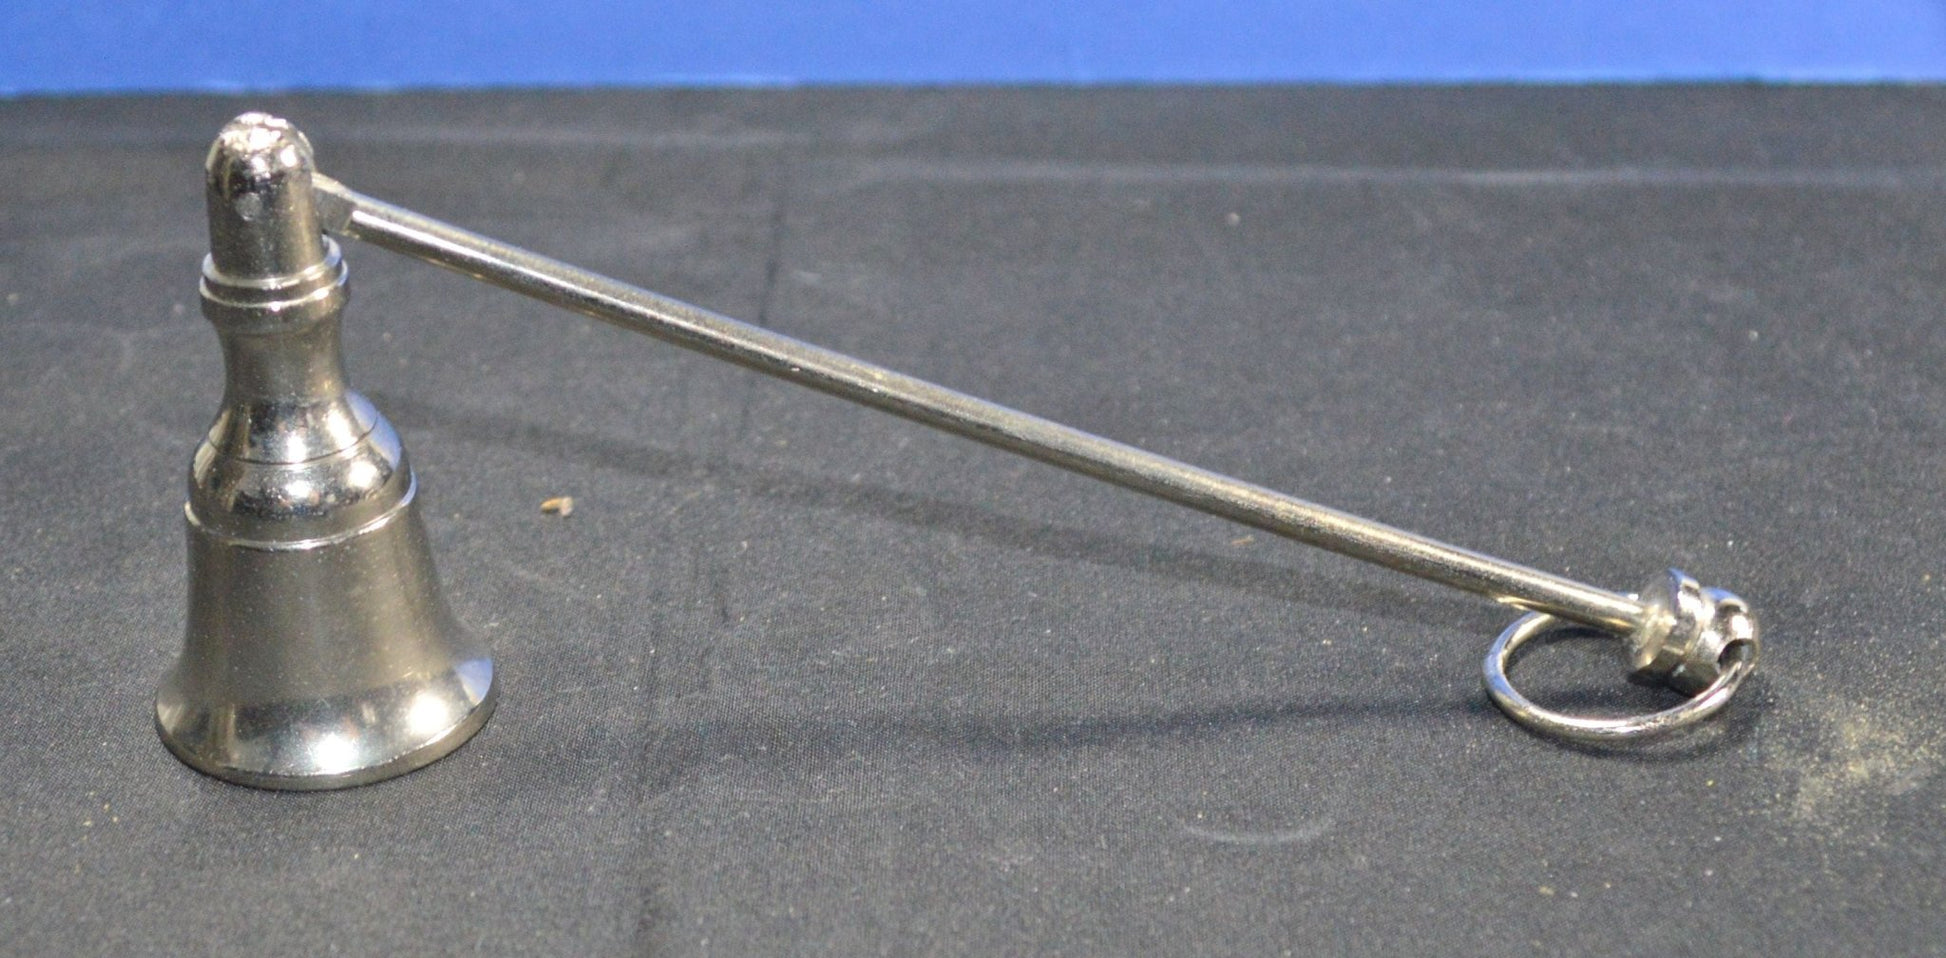 BELL SHAPED SILVER METAL CANDLE SNUFFER(PREVIOUSLY OWNED) GOOD CONDITION - TMD167207